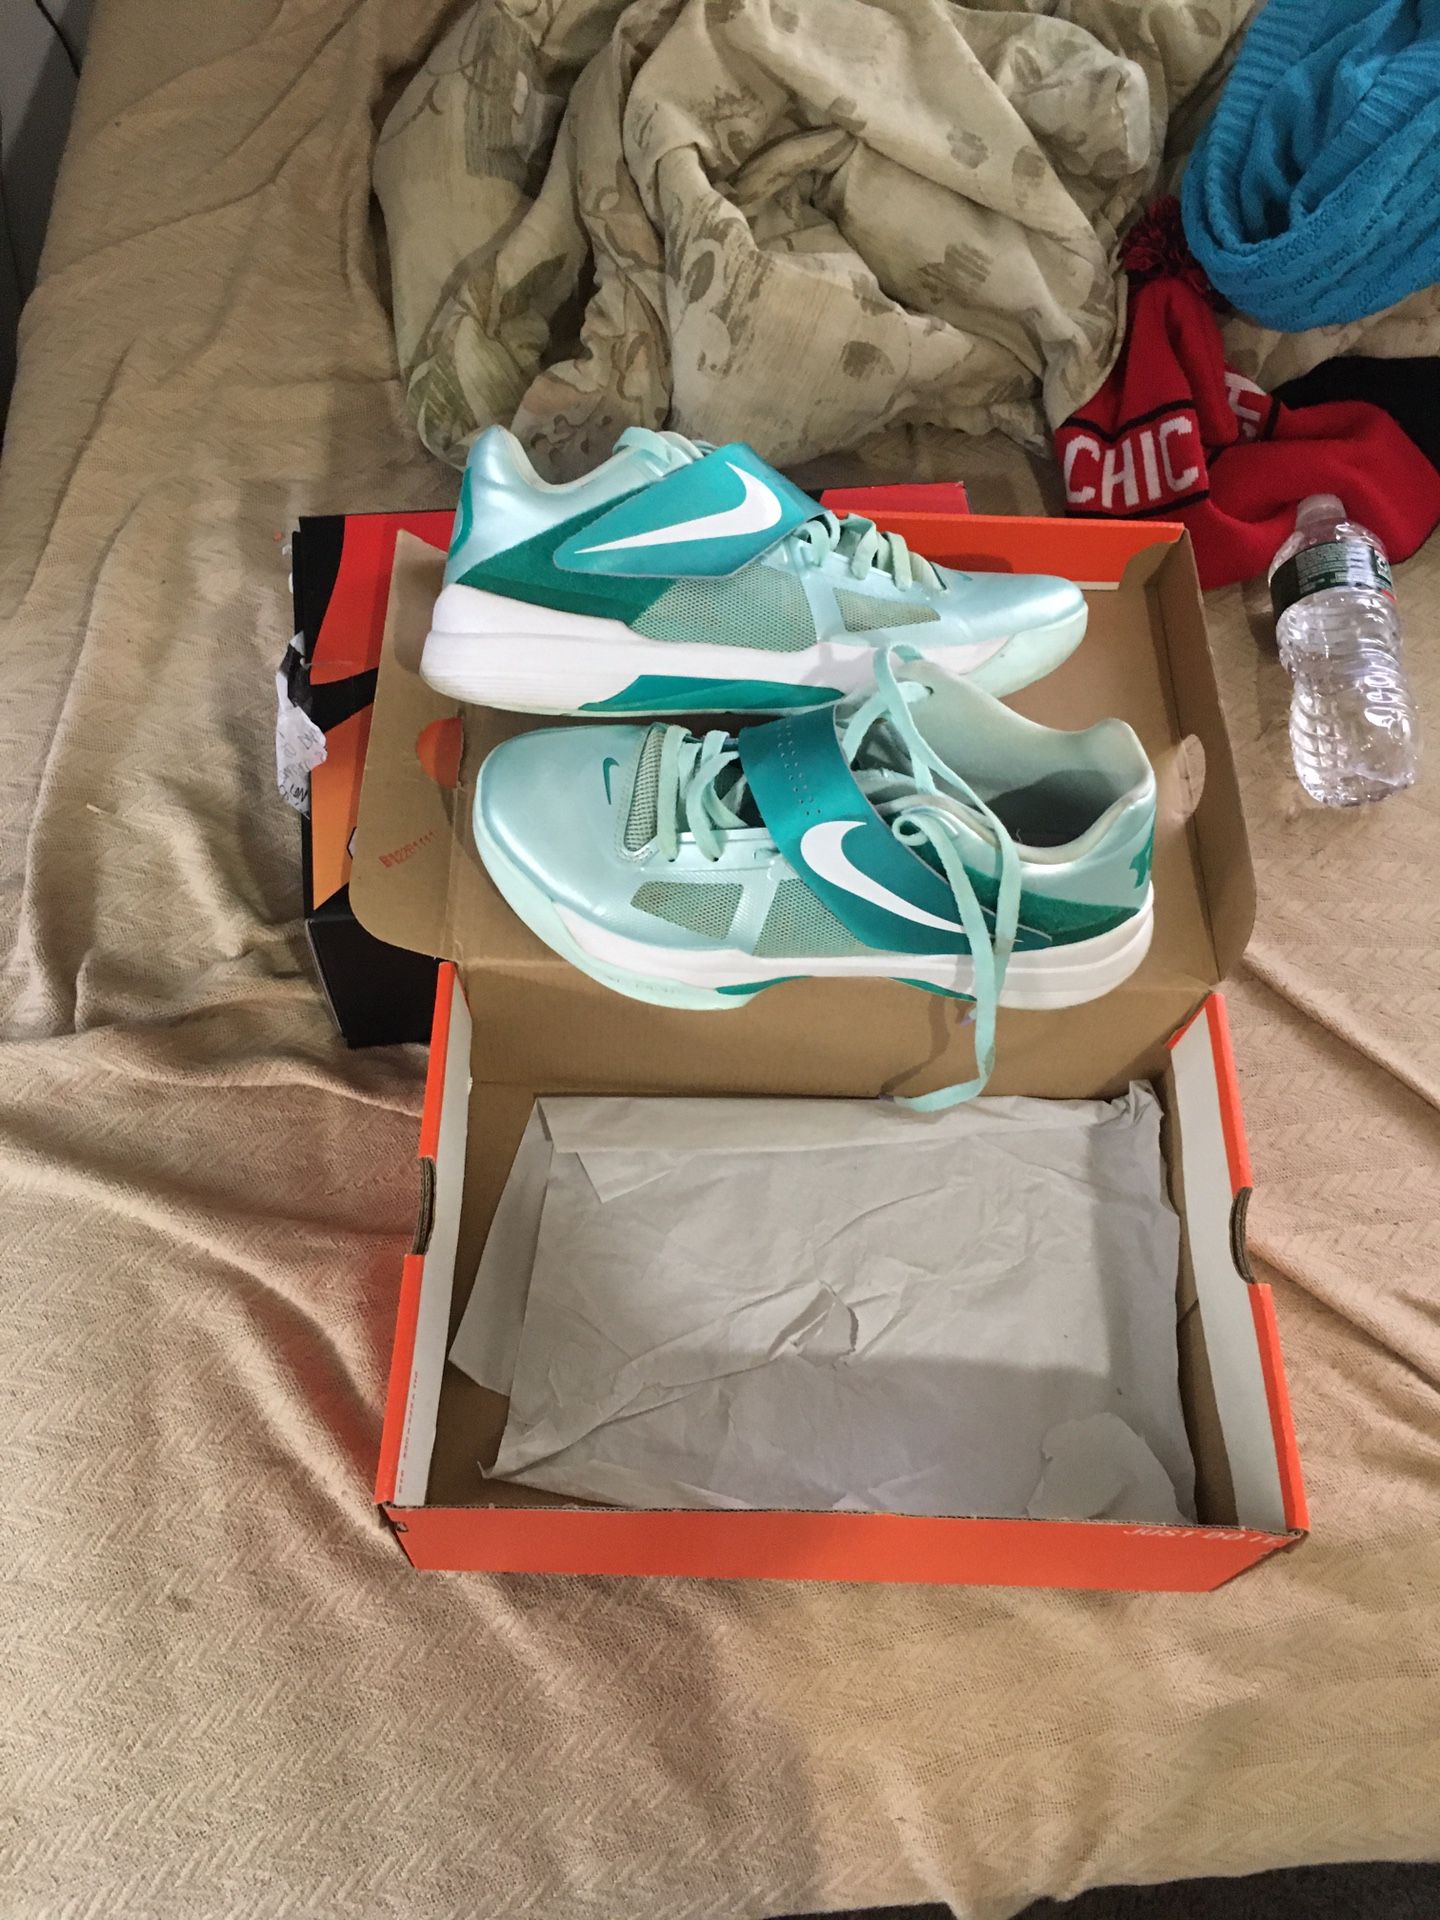 Easter kd 4 size 10